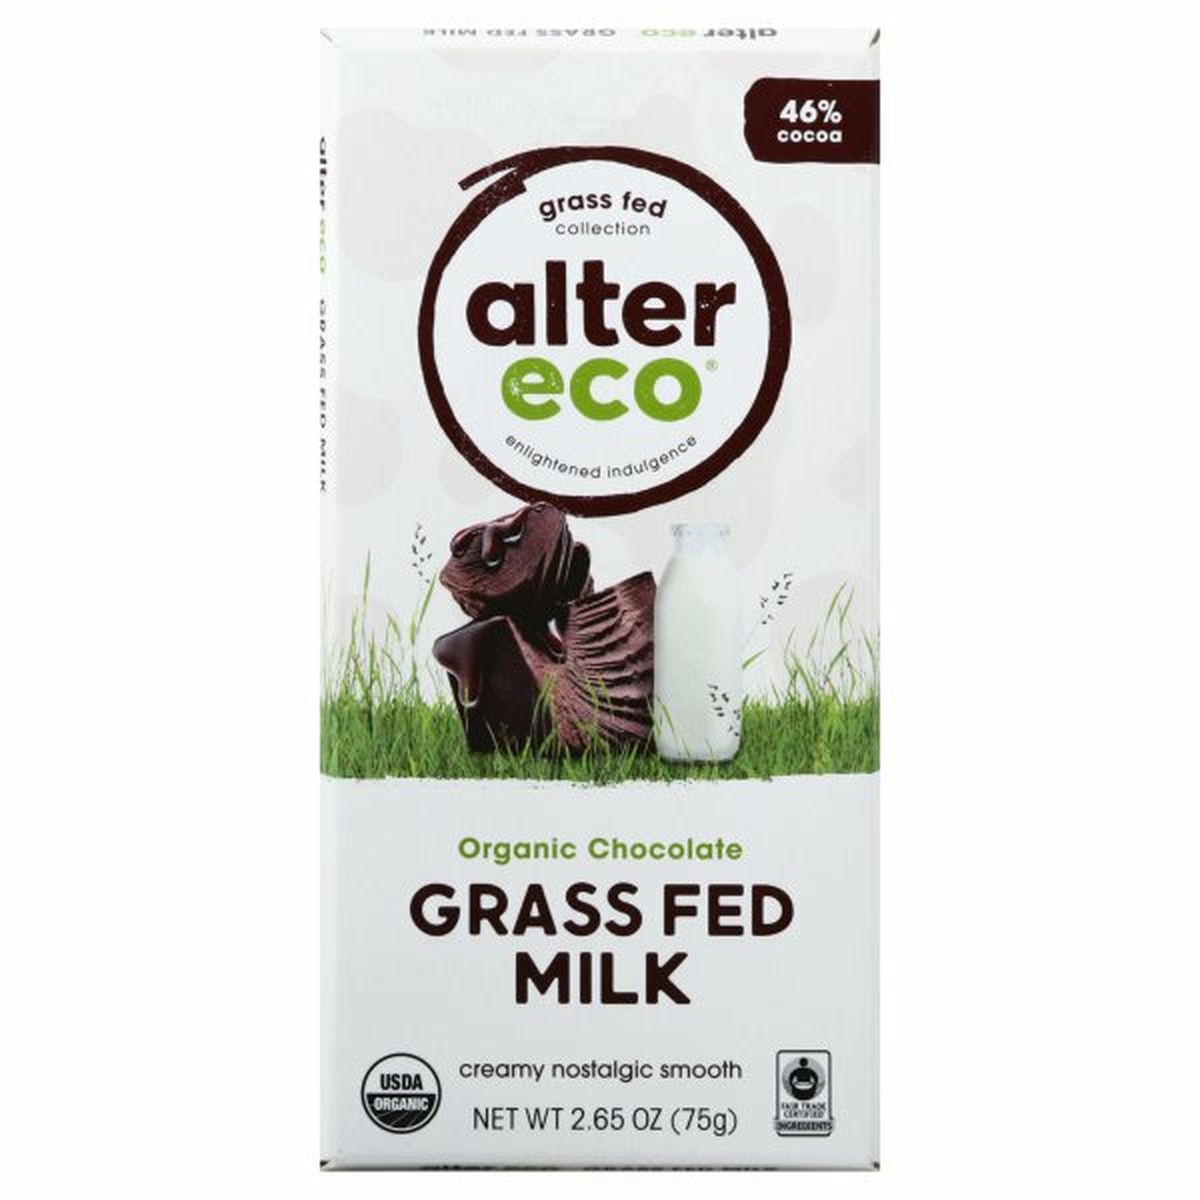 Calories in Alter Eco Grass Fed Collection Chocolate, Organic, Milk, 46% Cocoa